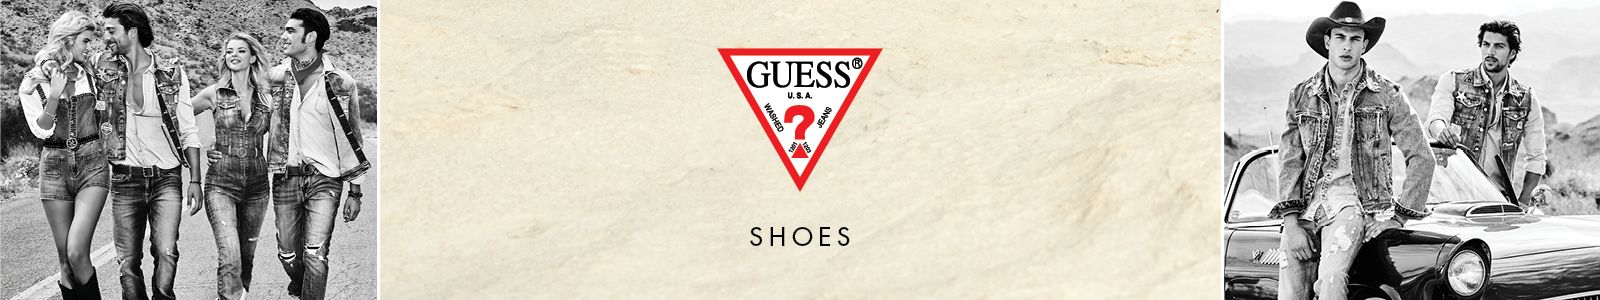 Guess, Shoes